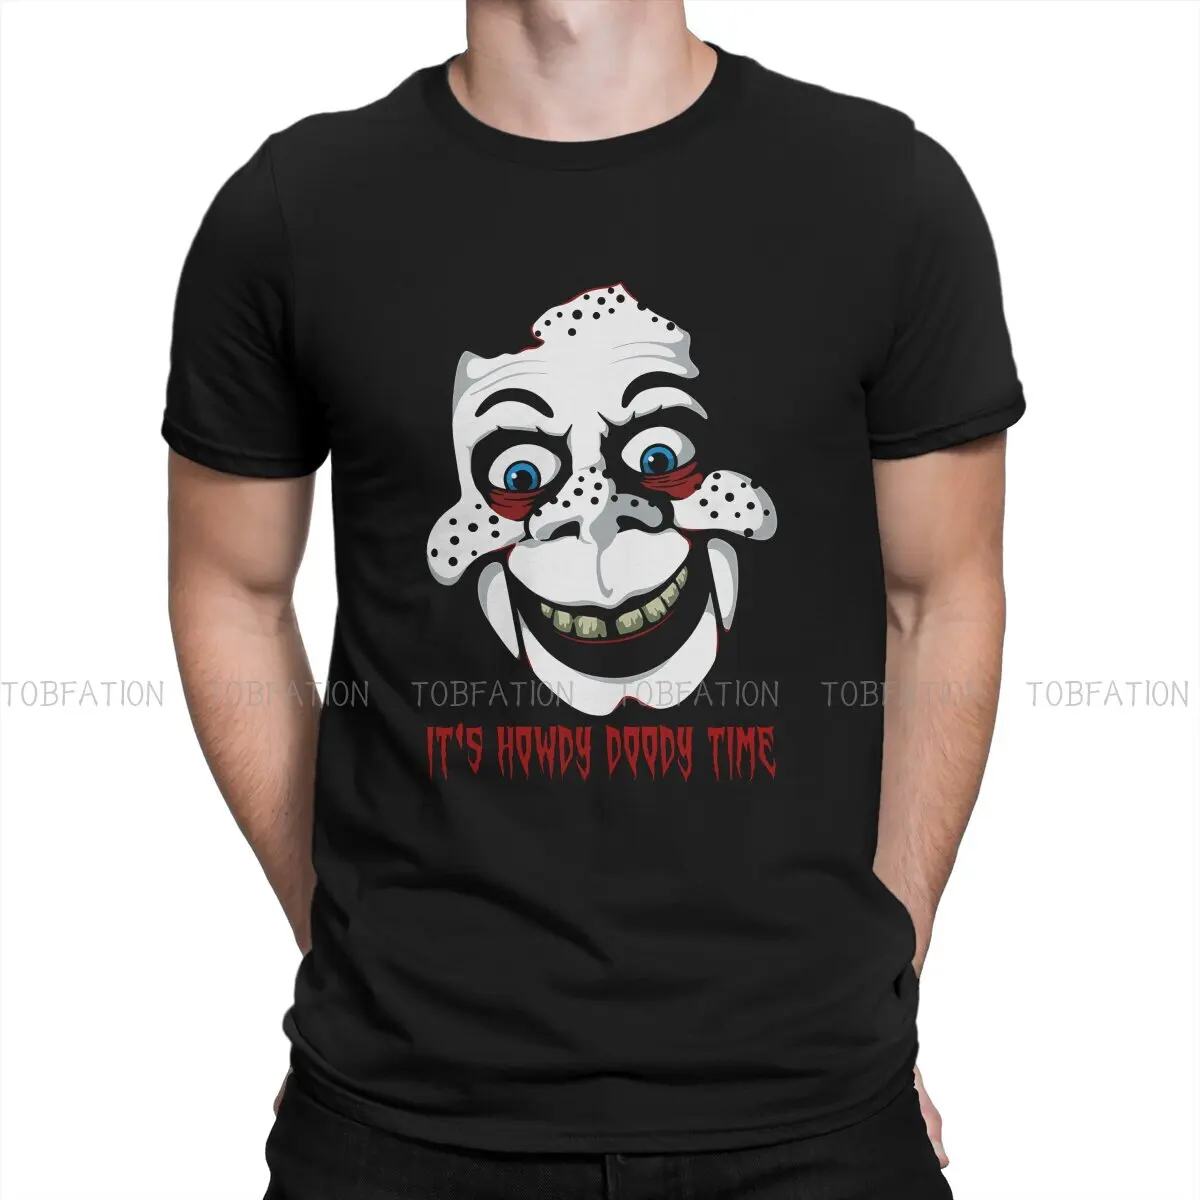 

The Exorcist Horror Film Original TShirts It’s Howdy Doody Time Distinctive Men's T Shirt New Trend Clothing Size S-6XL